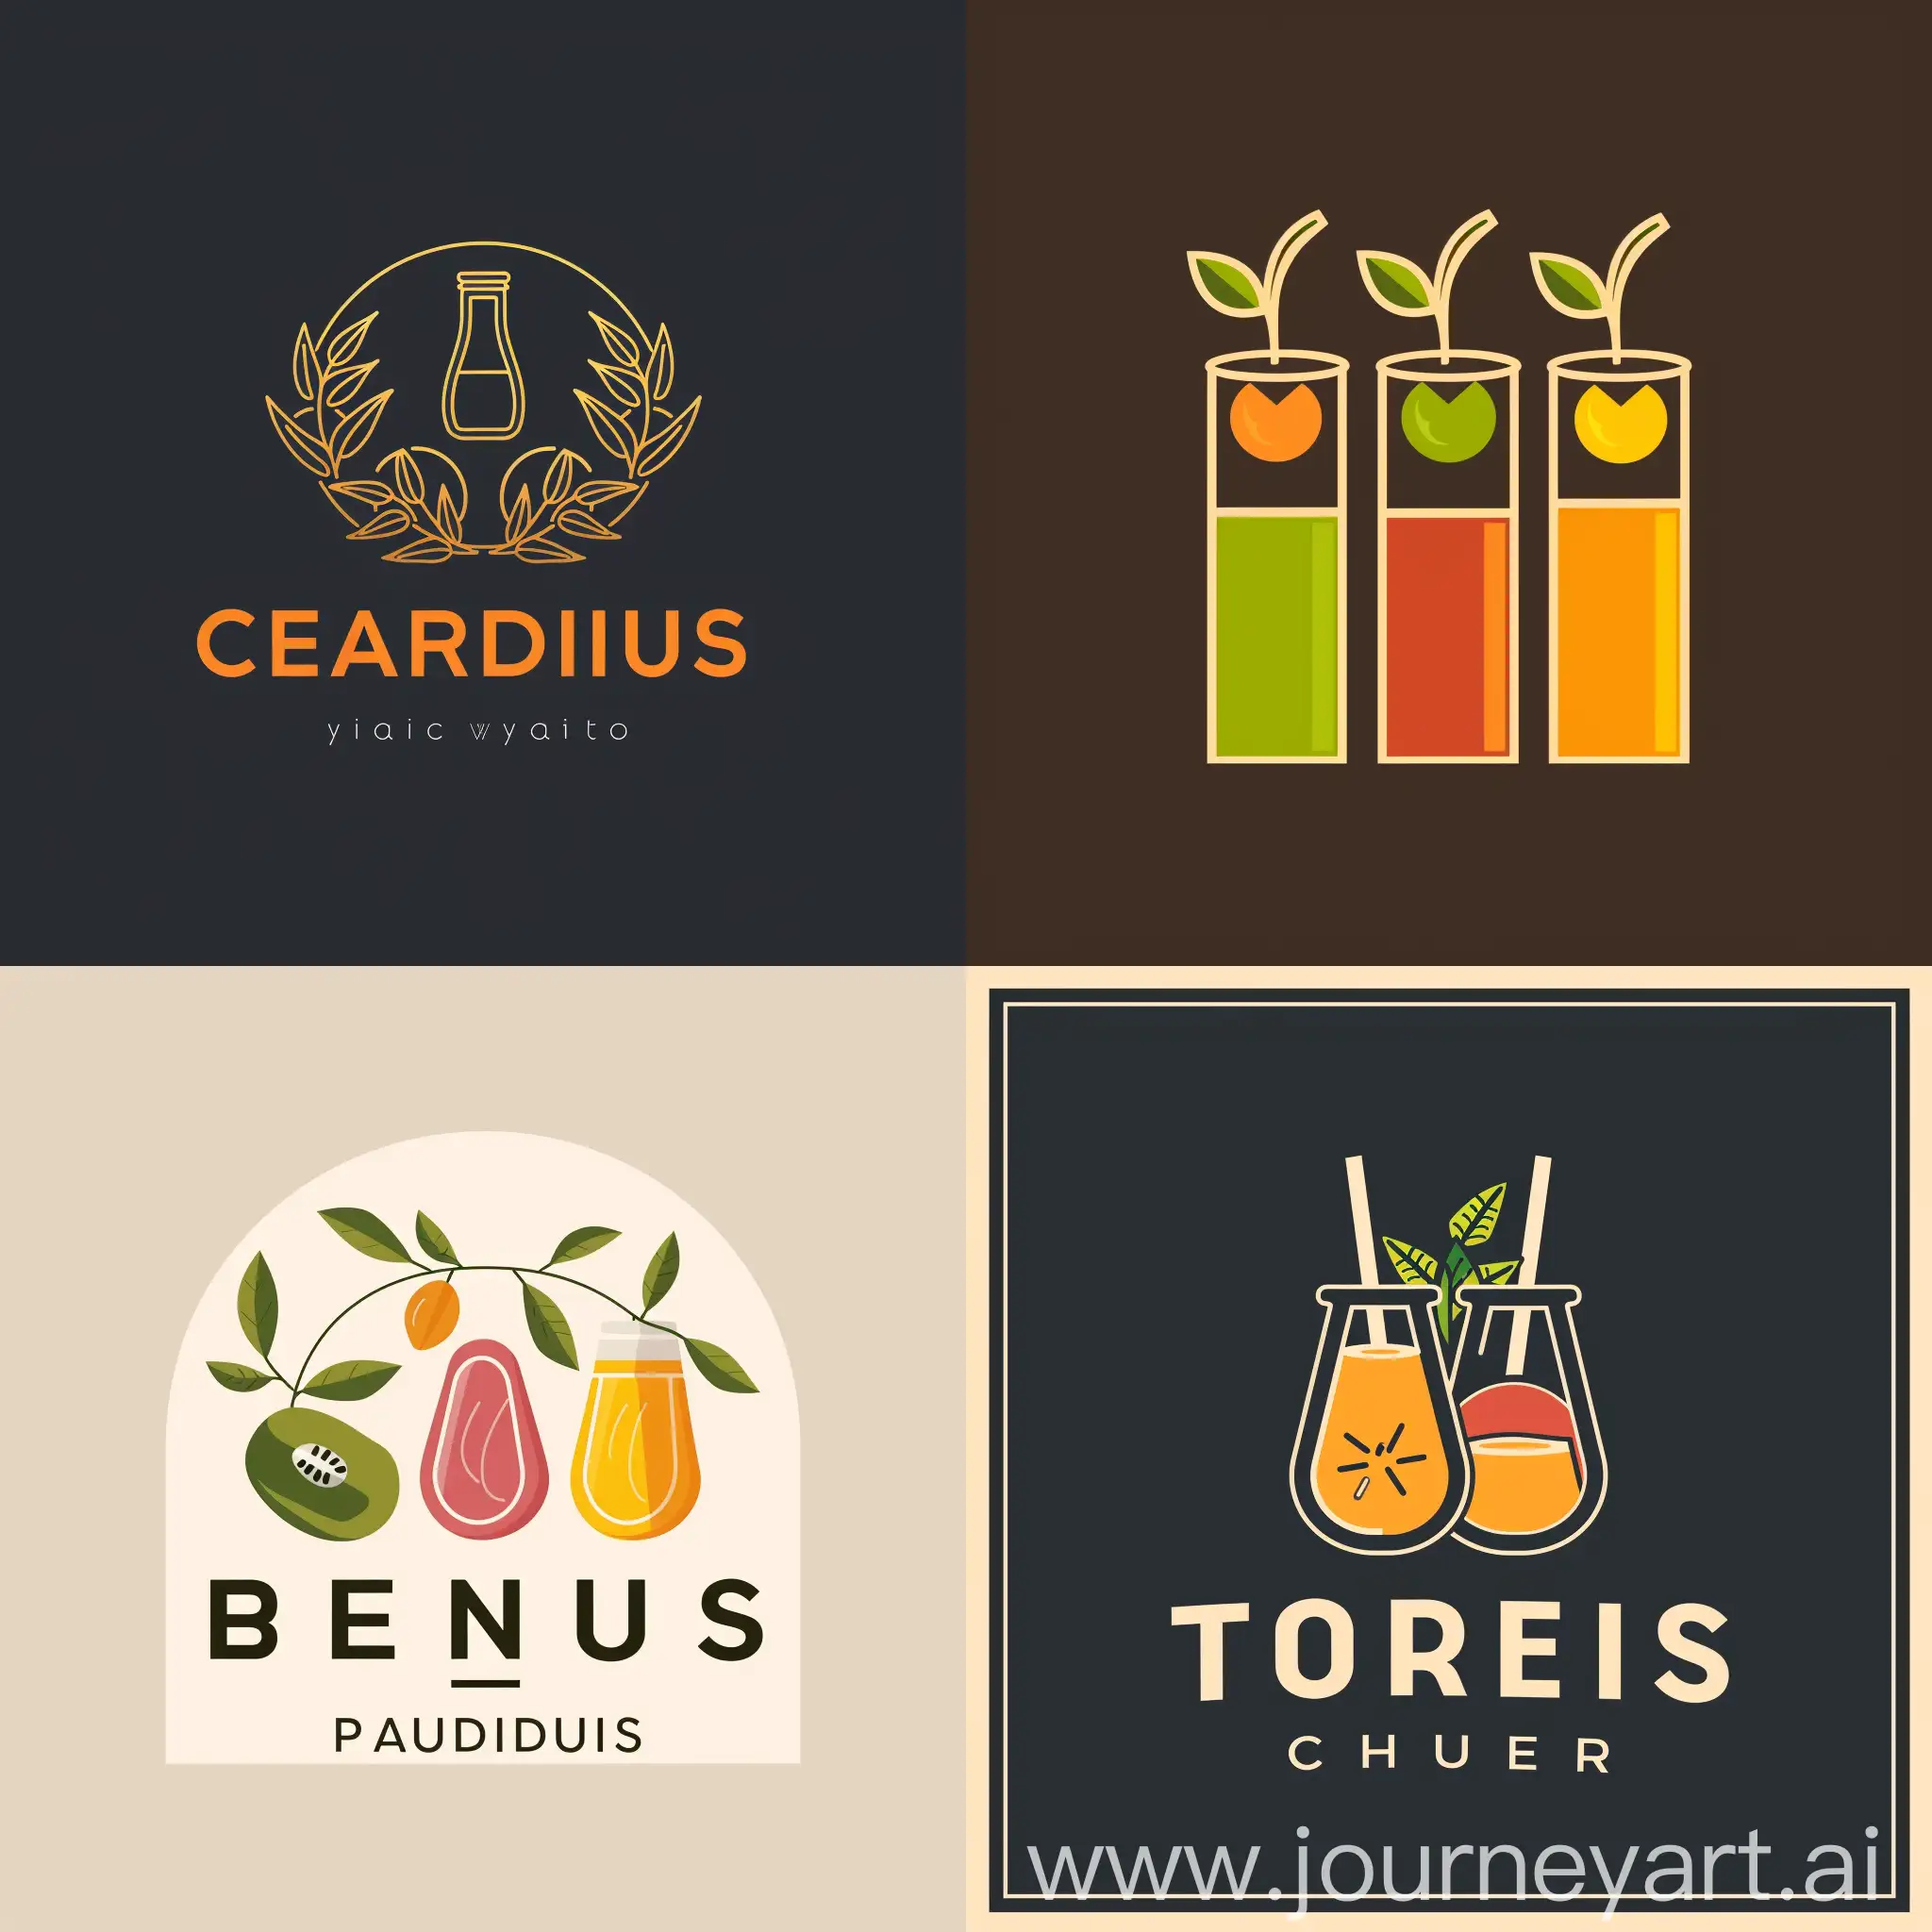 Modern Restaurant logo that can be used for juices as well